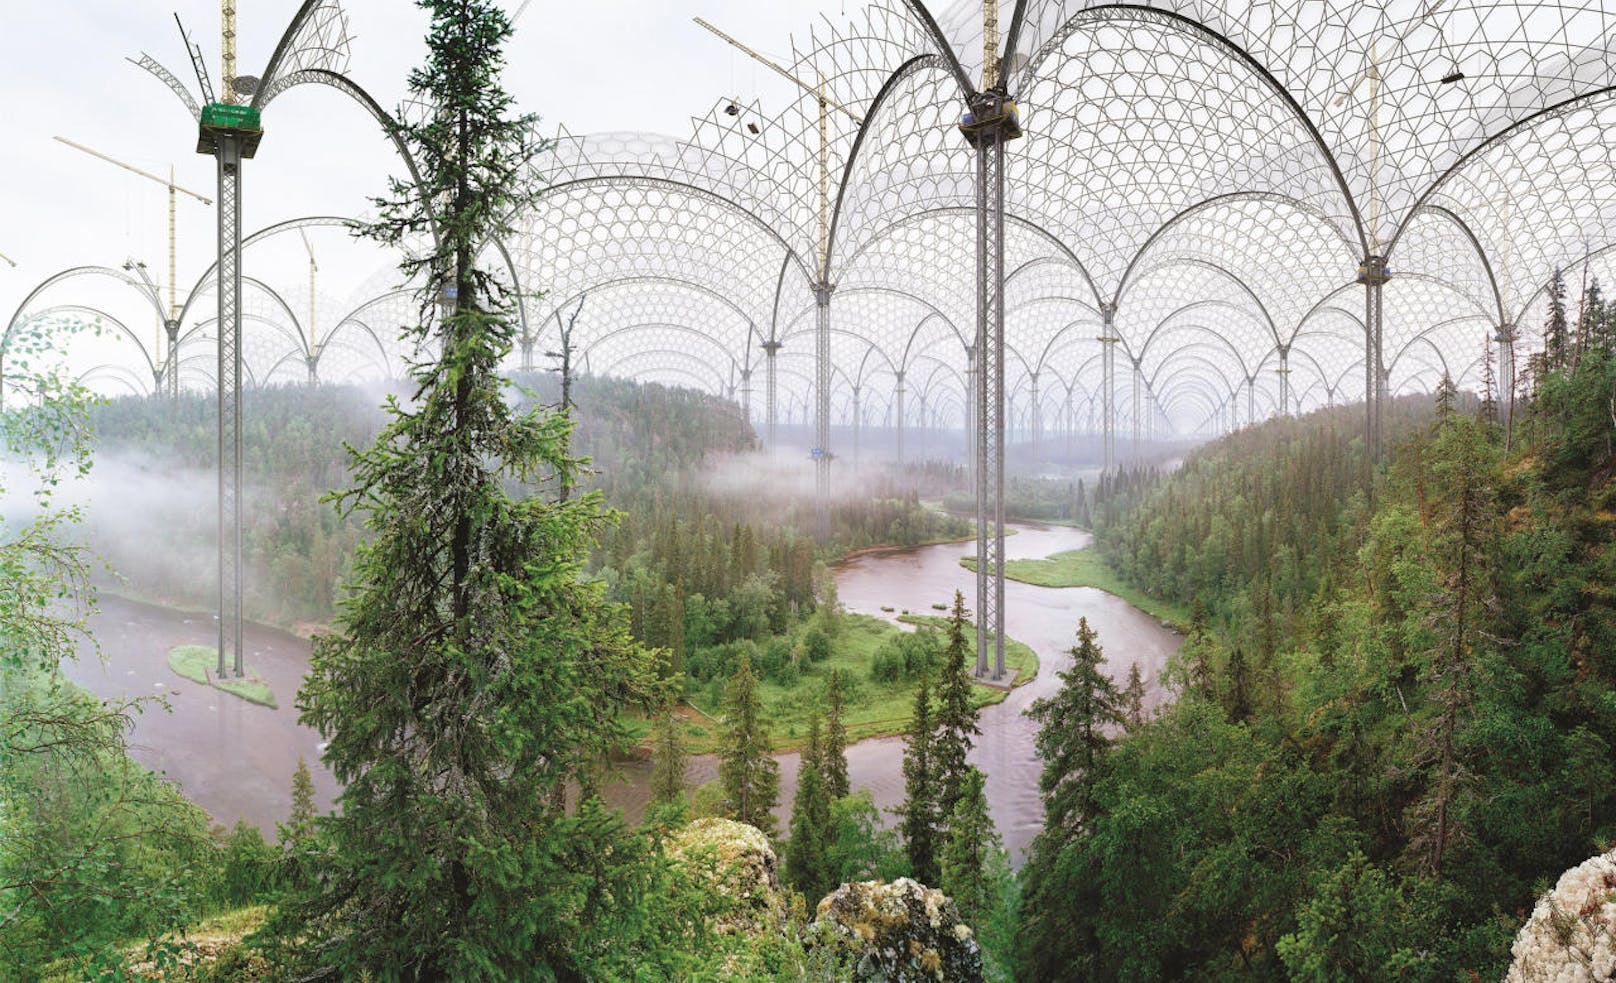 Ilkka Halso, Kitka River (aus der Serie Museum of Nture), 2004, Courtesy Gallery Taik Persons, Berlin